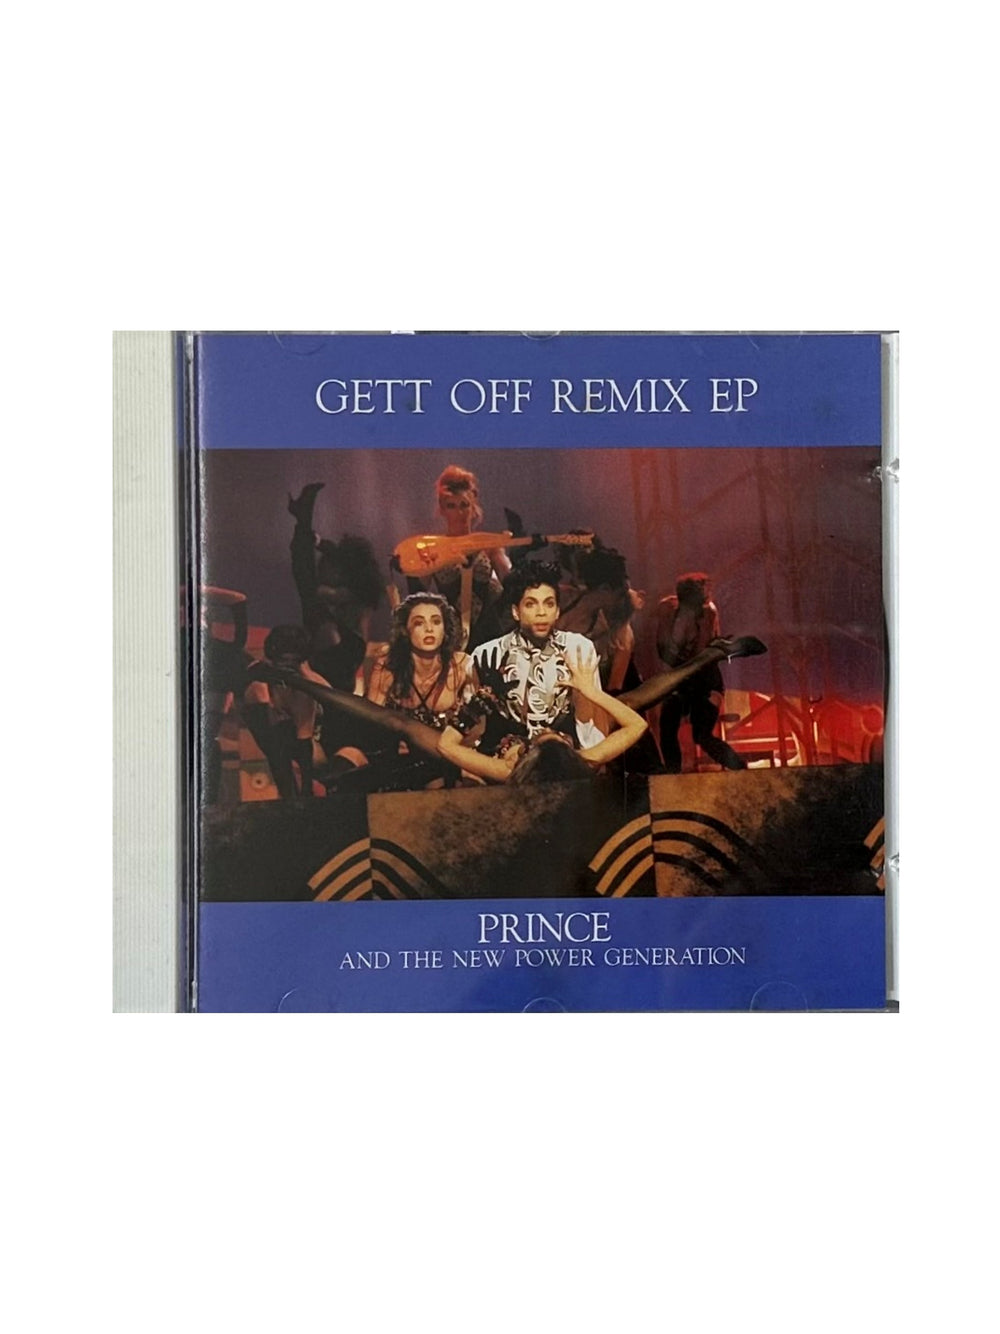 Prince – & The New Power Generation – GETT OFF CD EP Japan Preloved: 1991